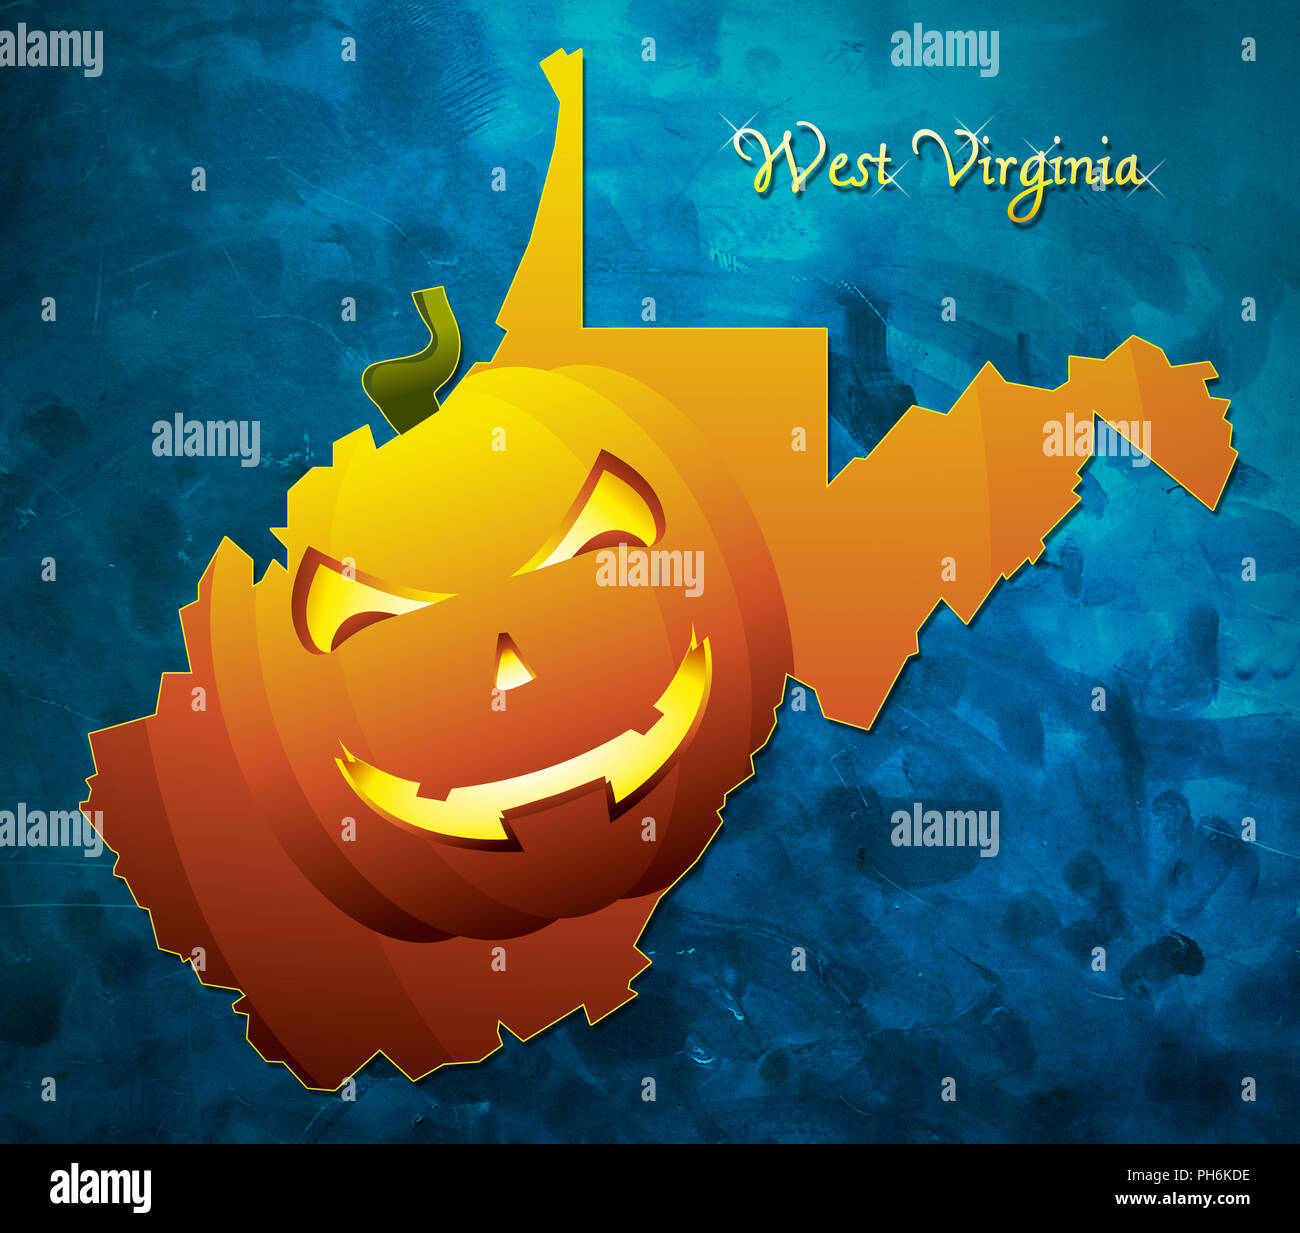 West Virginia state map USA with halloween pumpkin face illustration Stock Photo